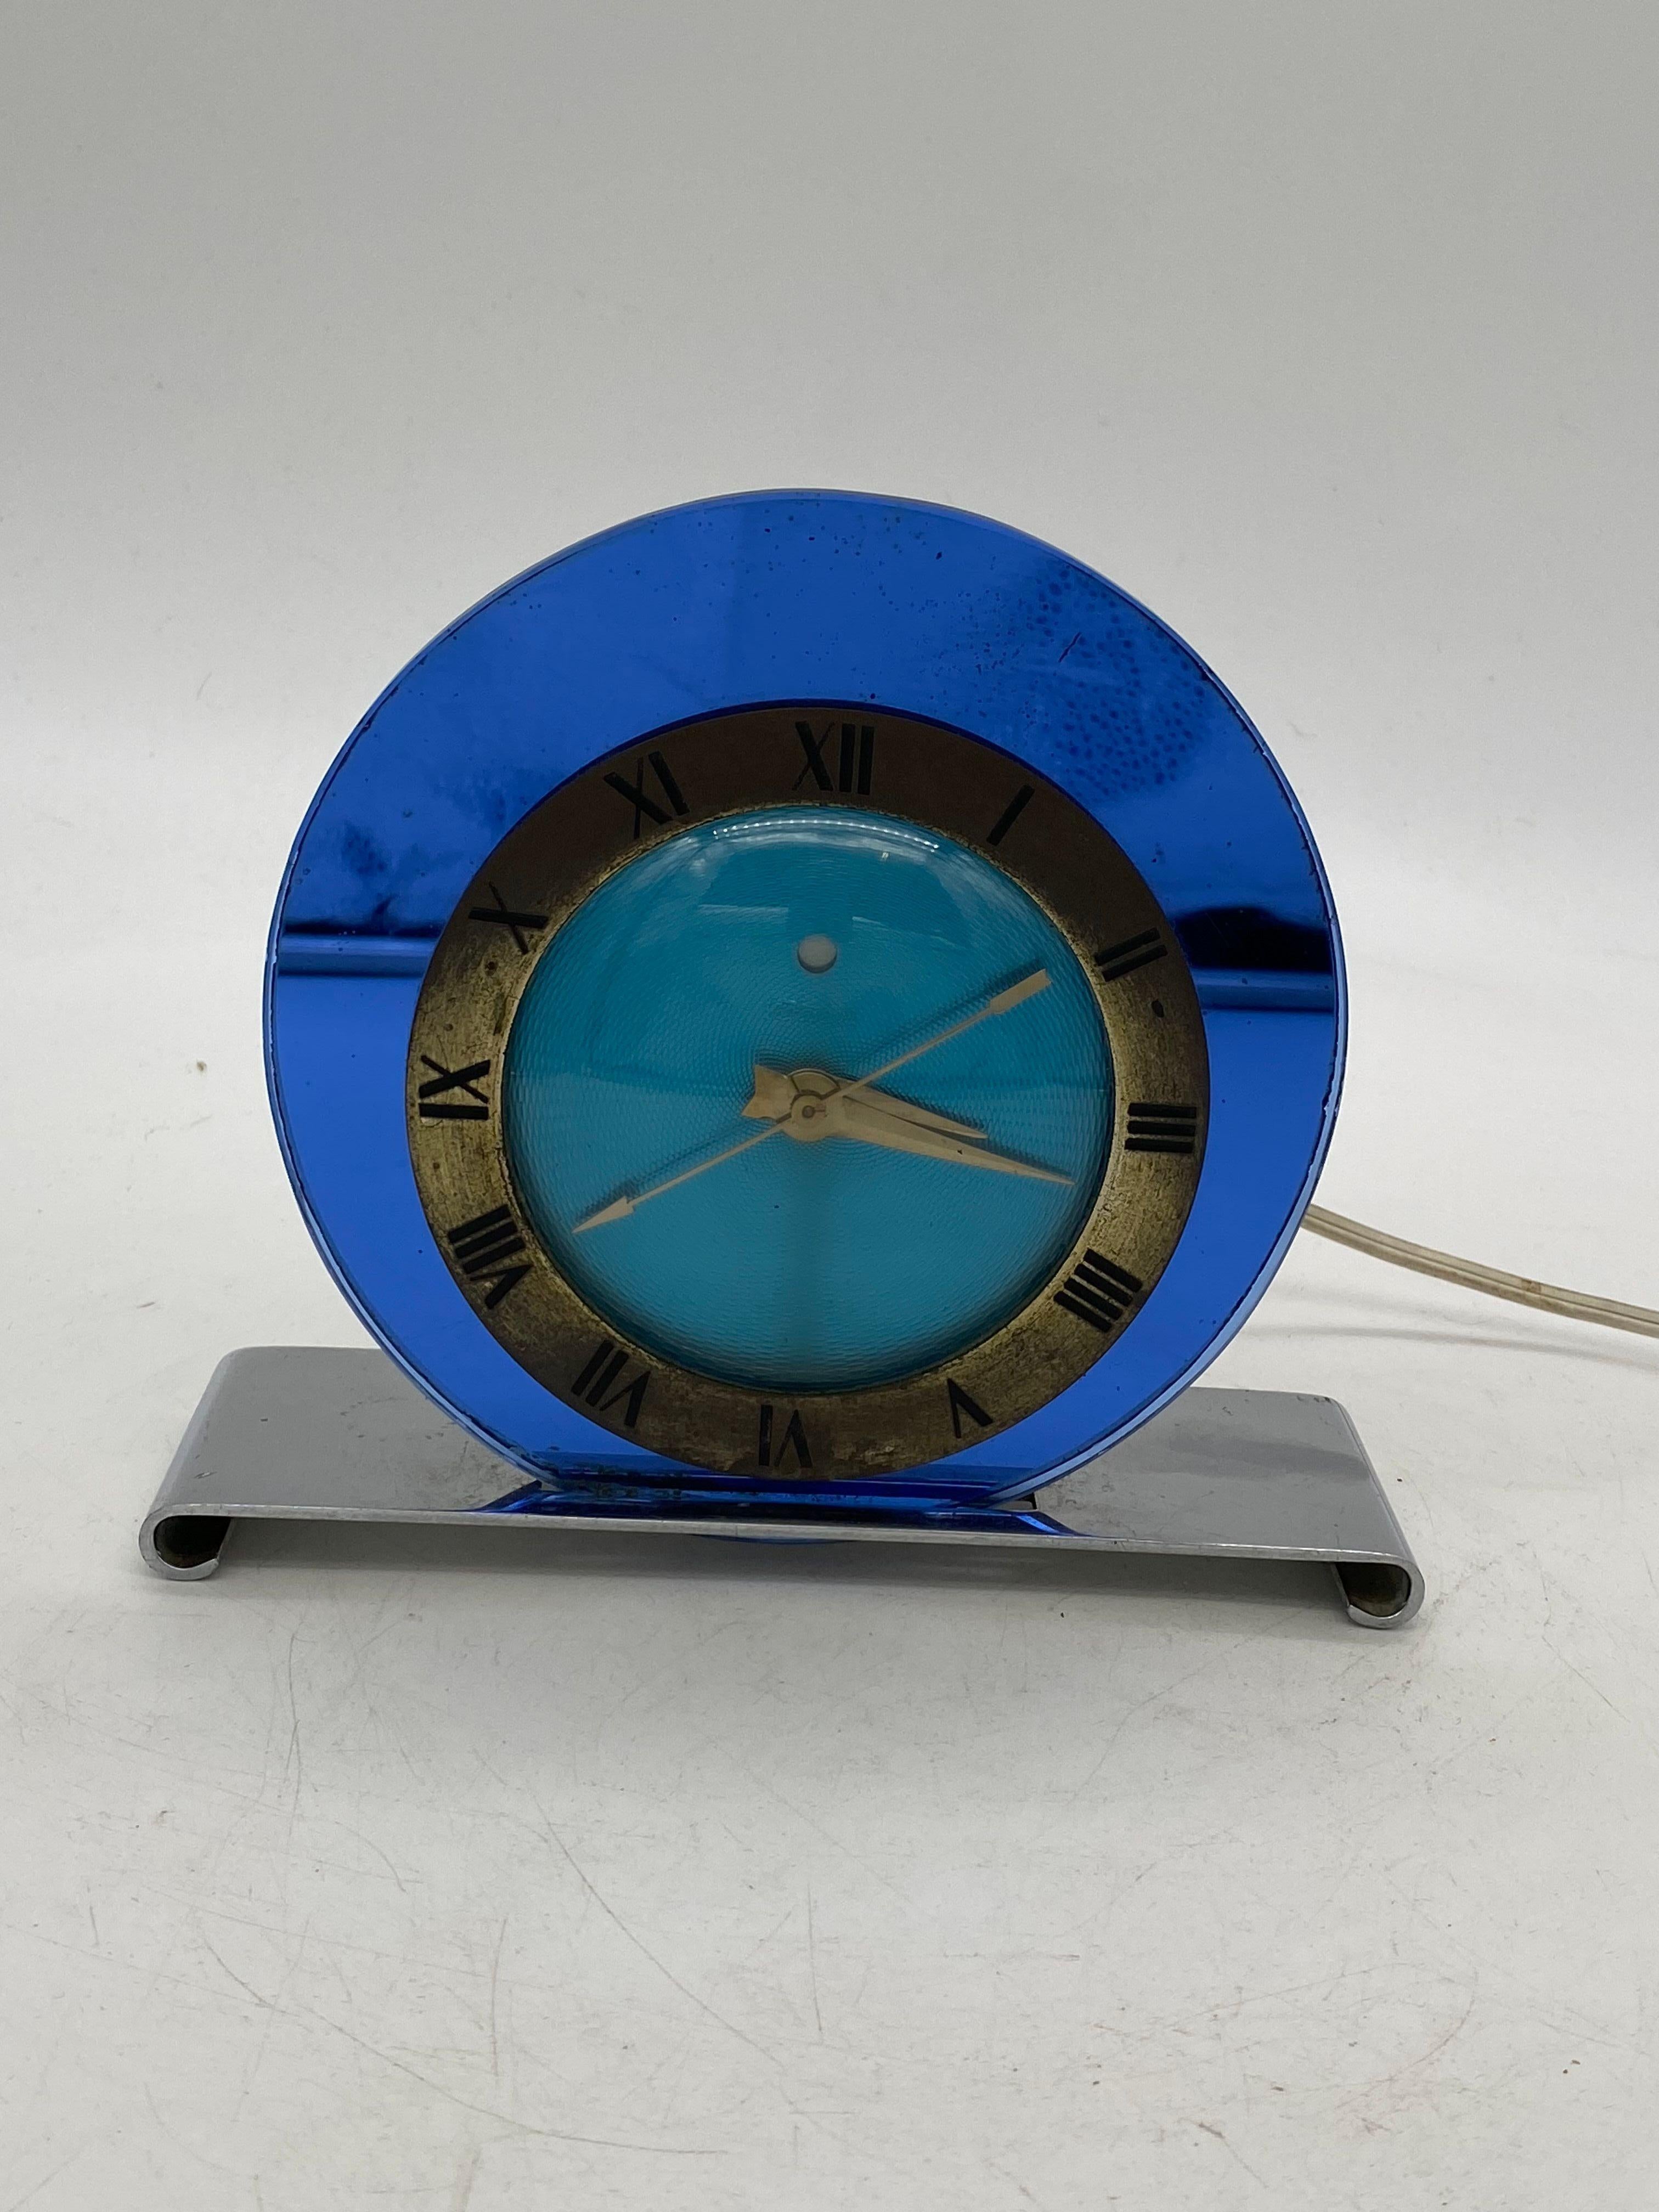 This is a 1935-1939 Electric Telechron Art Deco clock Model 4F65, the 